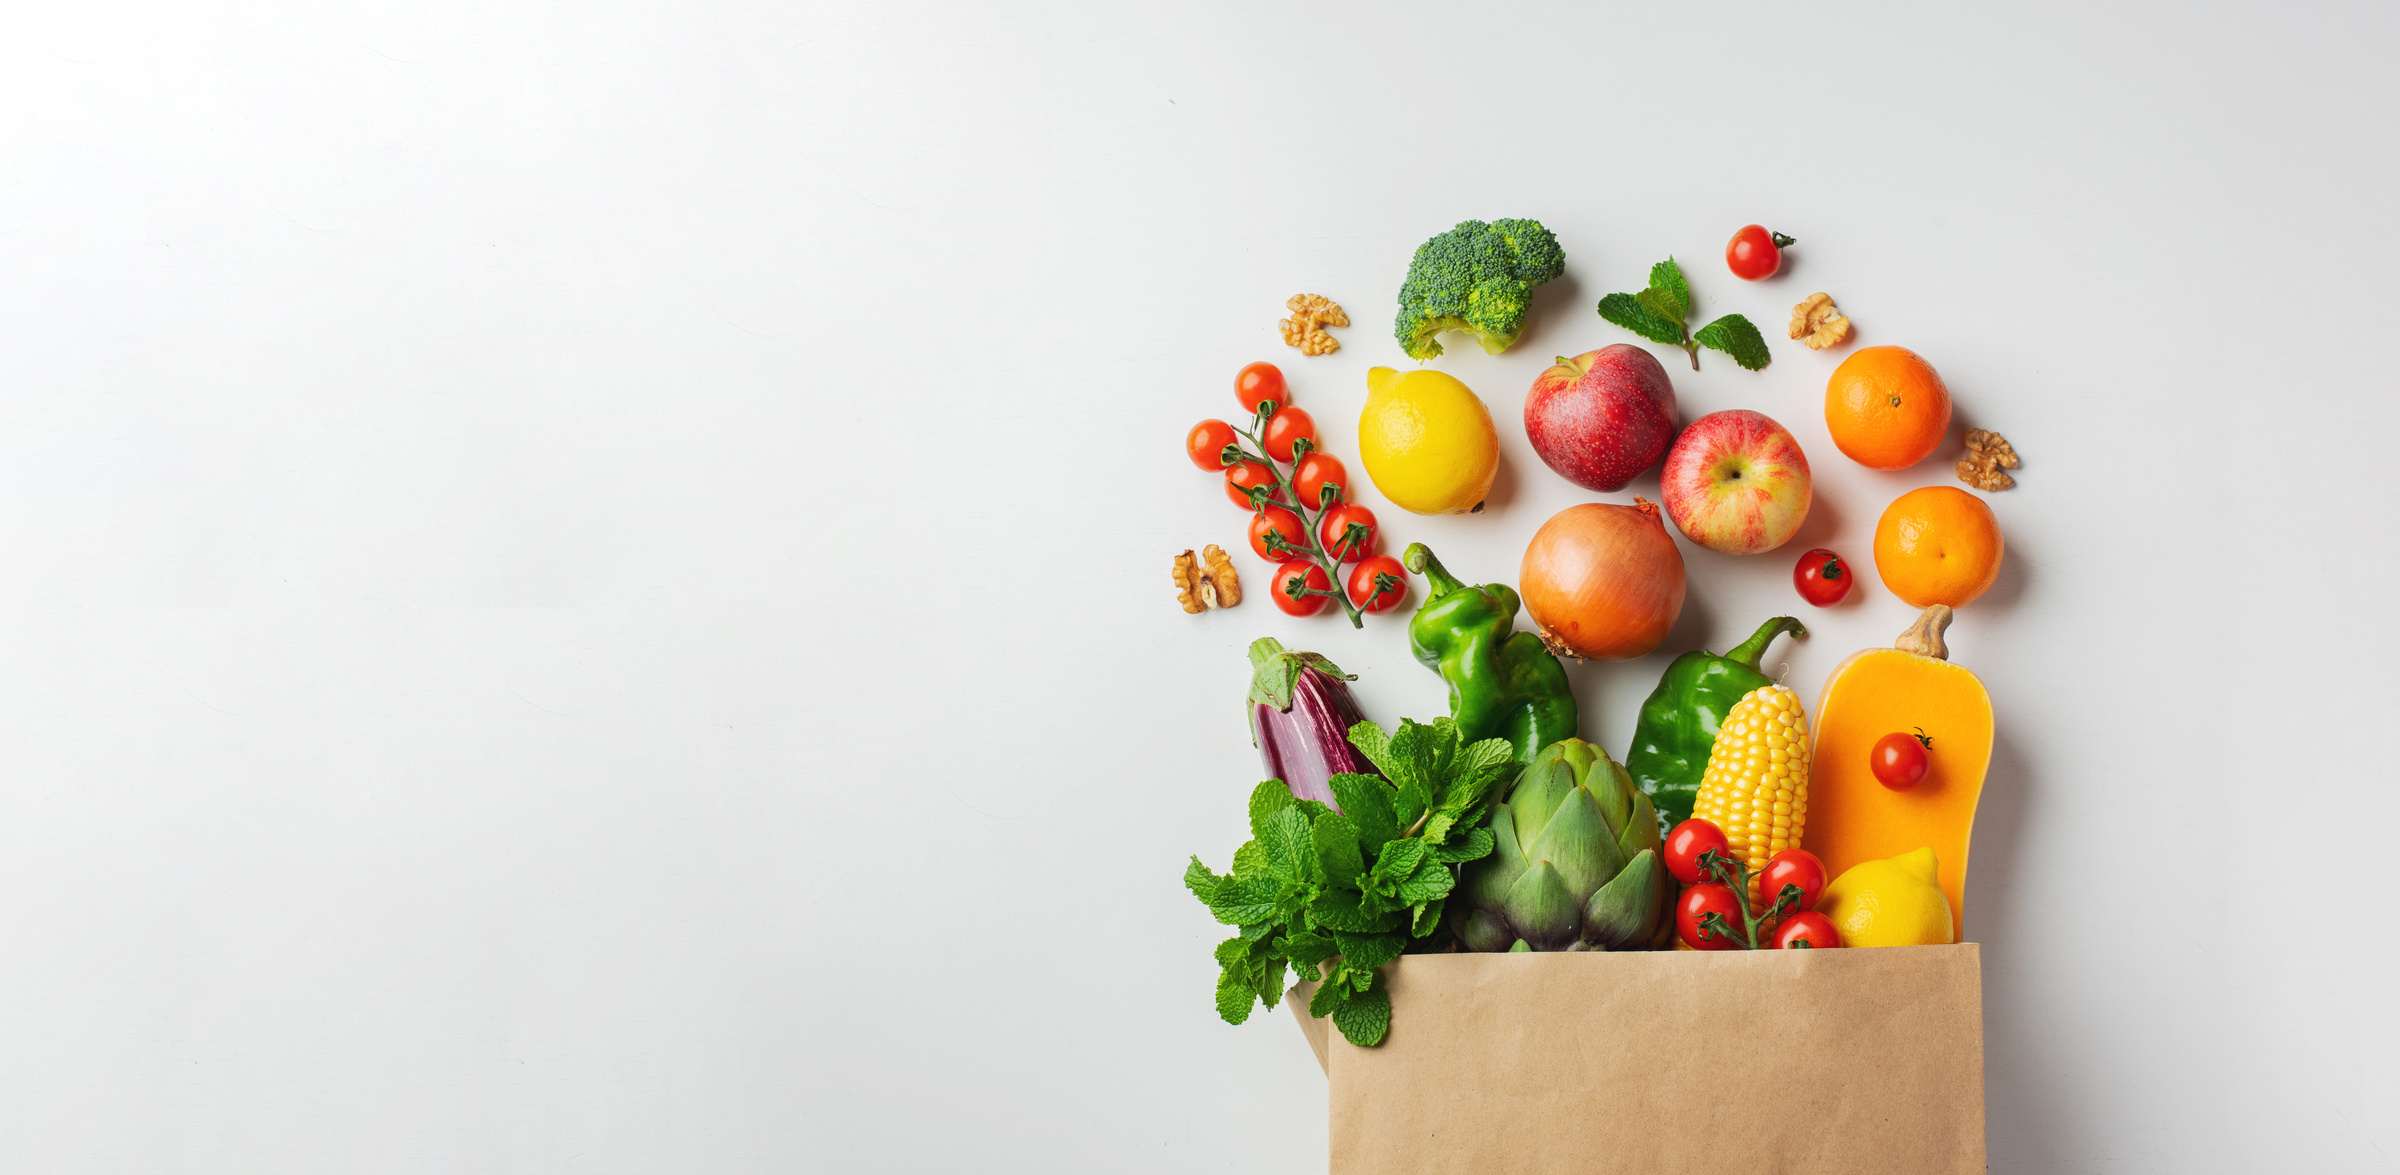 Delivery Healthy Food Background. Healthy Vegan Vegetarian Food in Paper Bag Vegetables and Fruits on White, Copy Space, Banner. Shopping Food Supermarket and Clean Vegan Eating Concept